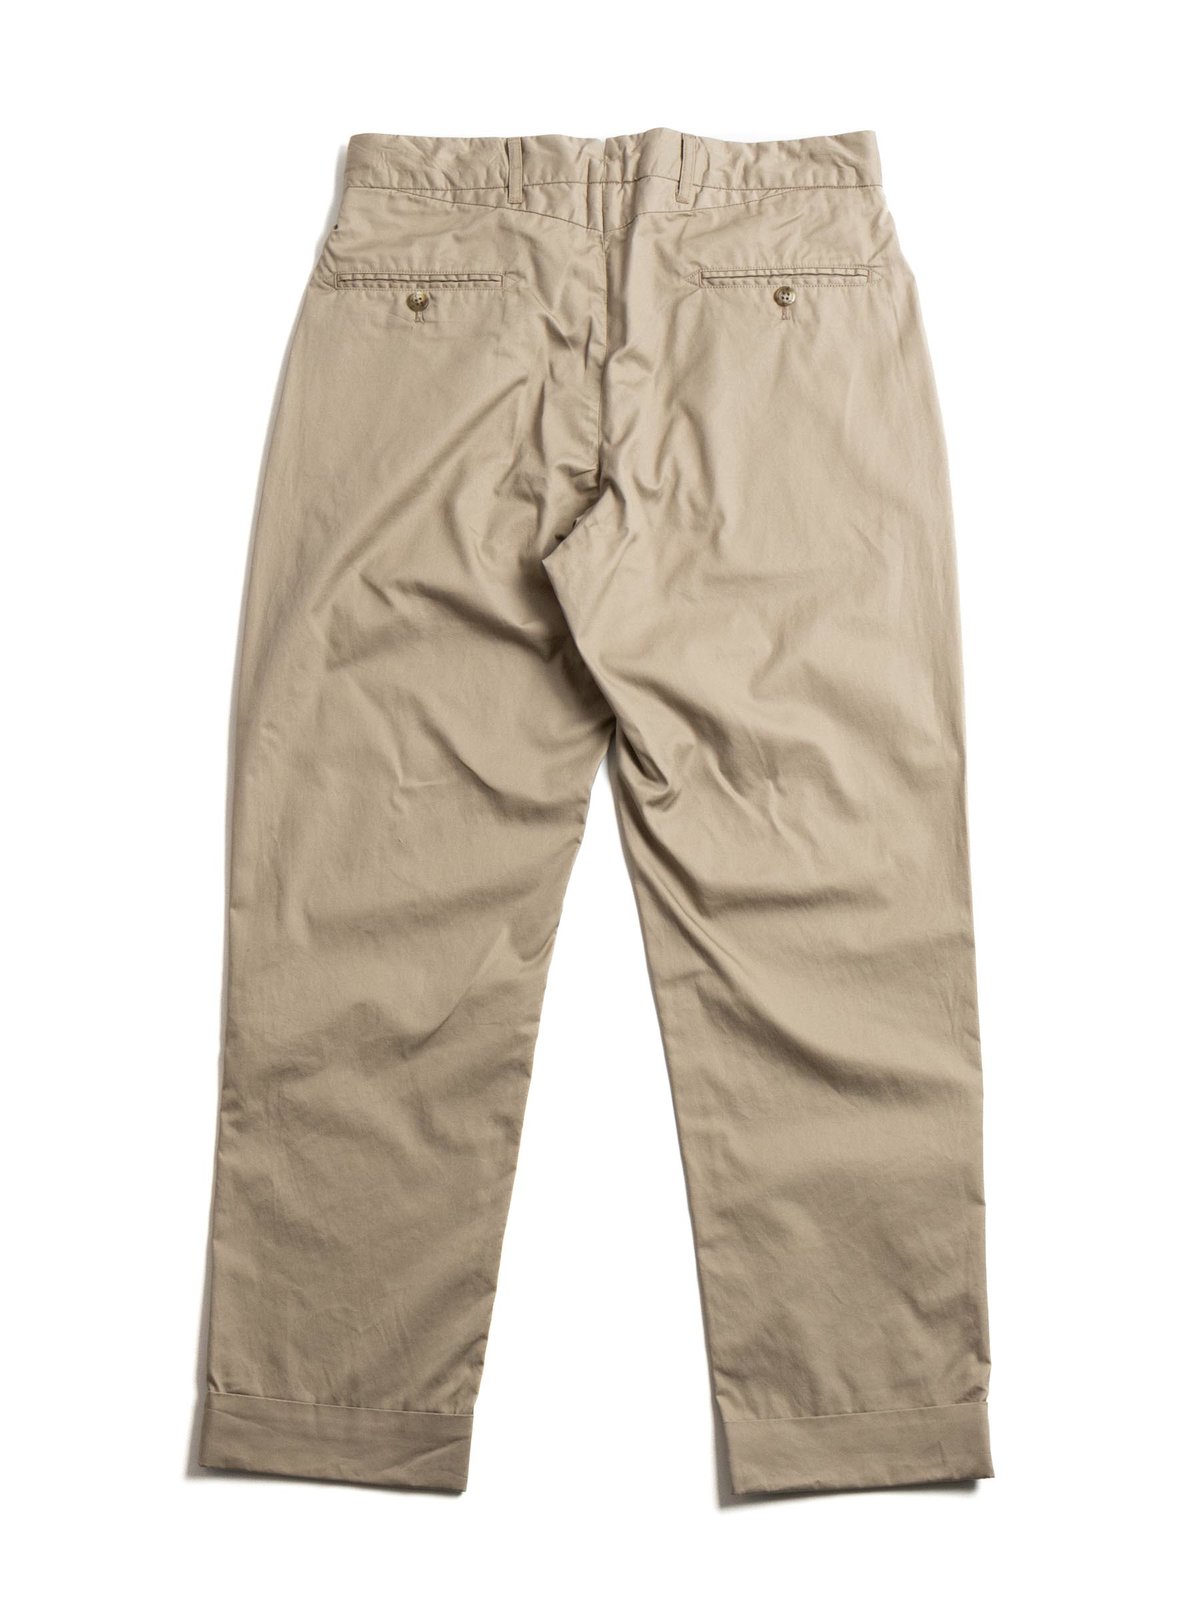 ANDOVER PANT KHAKI HIGH COUNT TWILL by Engineered Garments – The Bureau ...